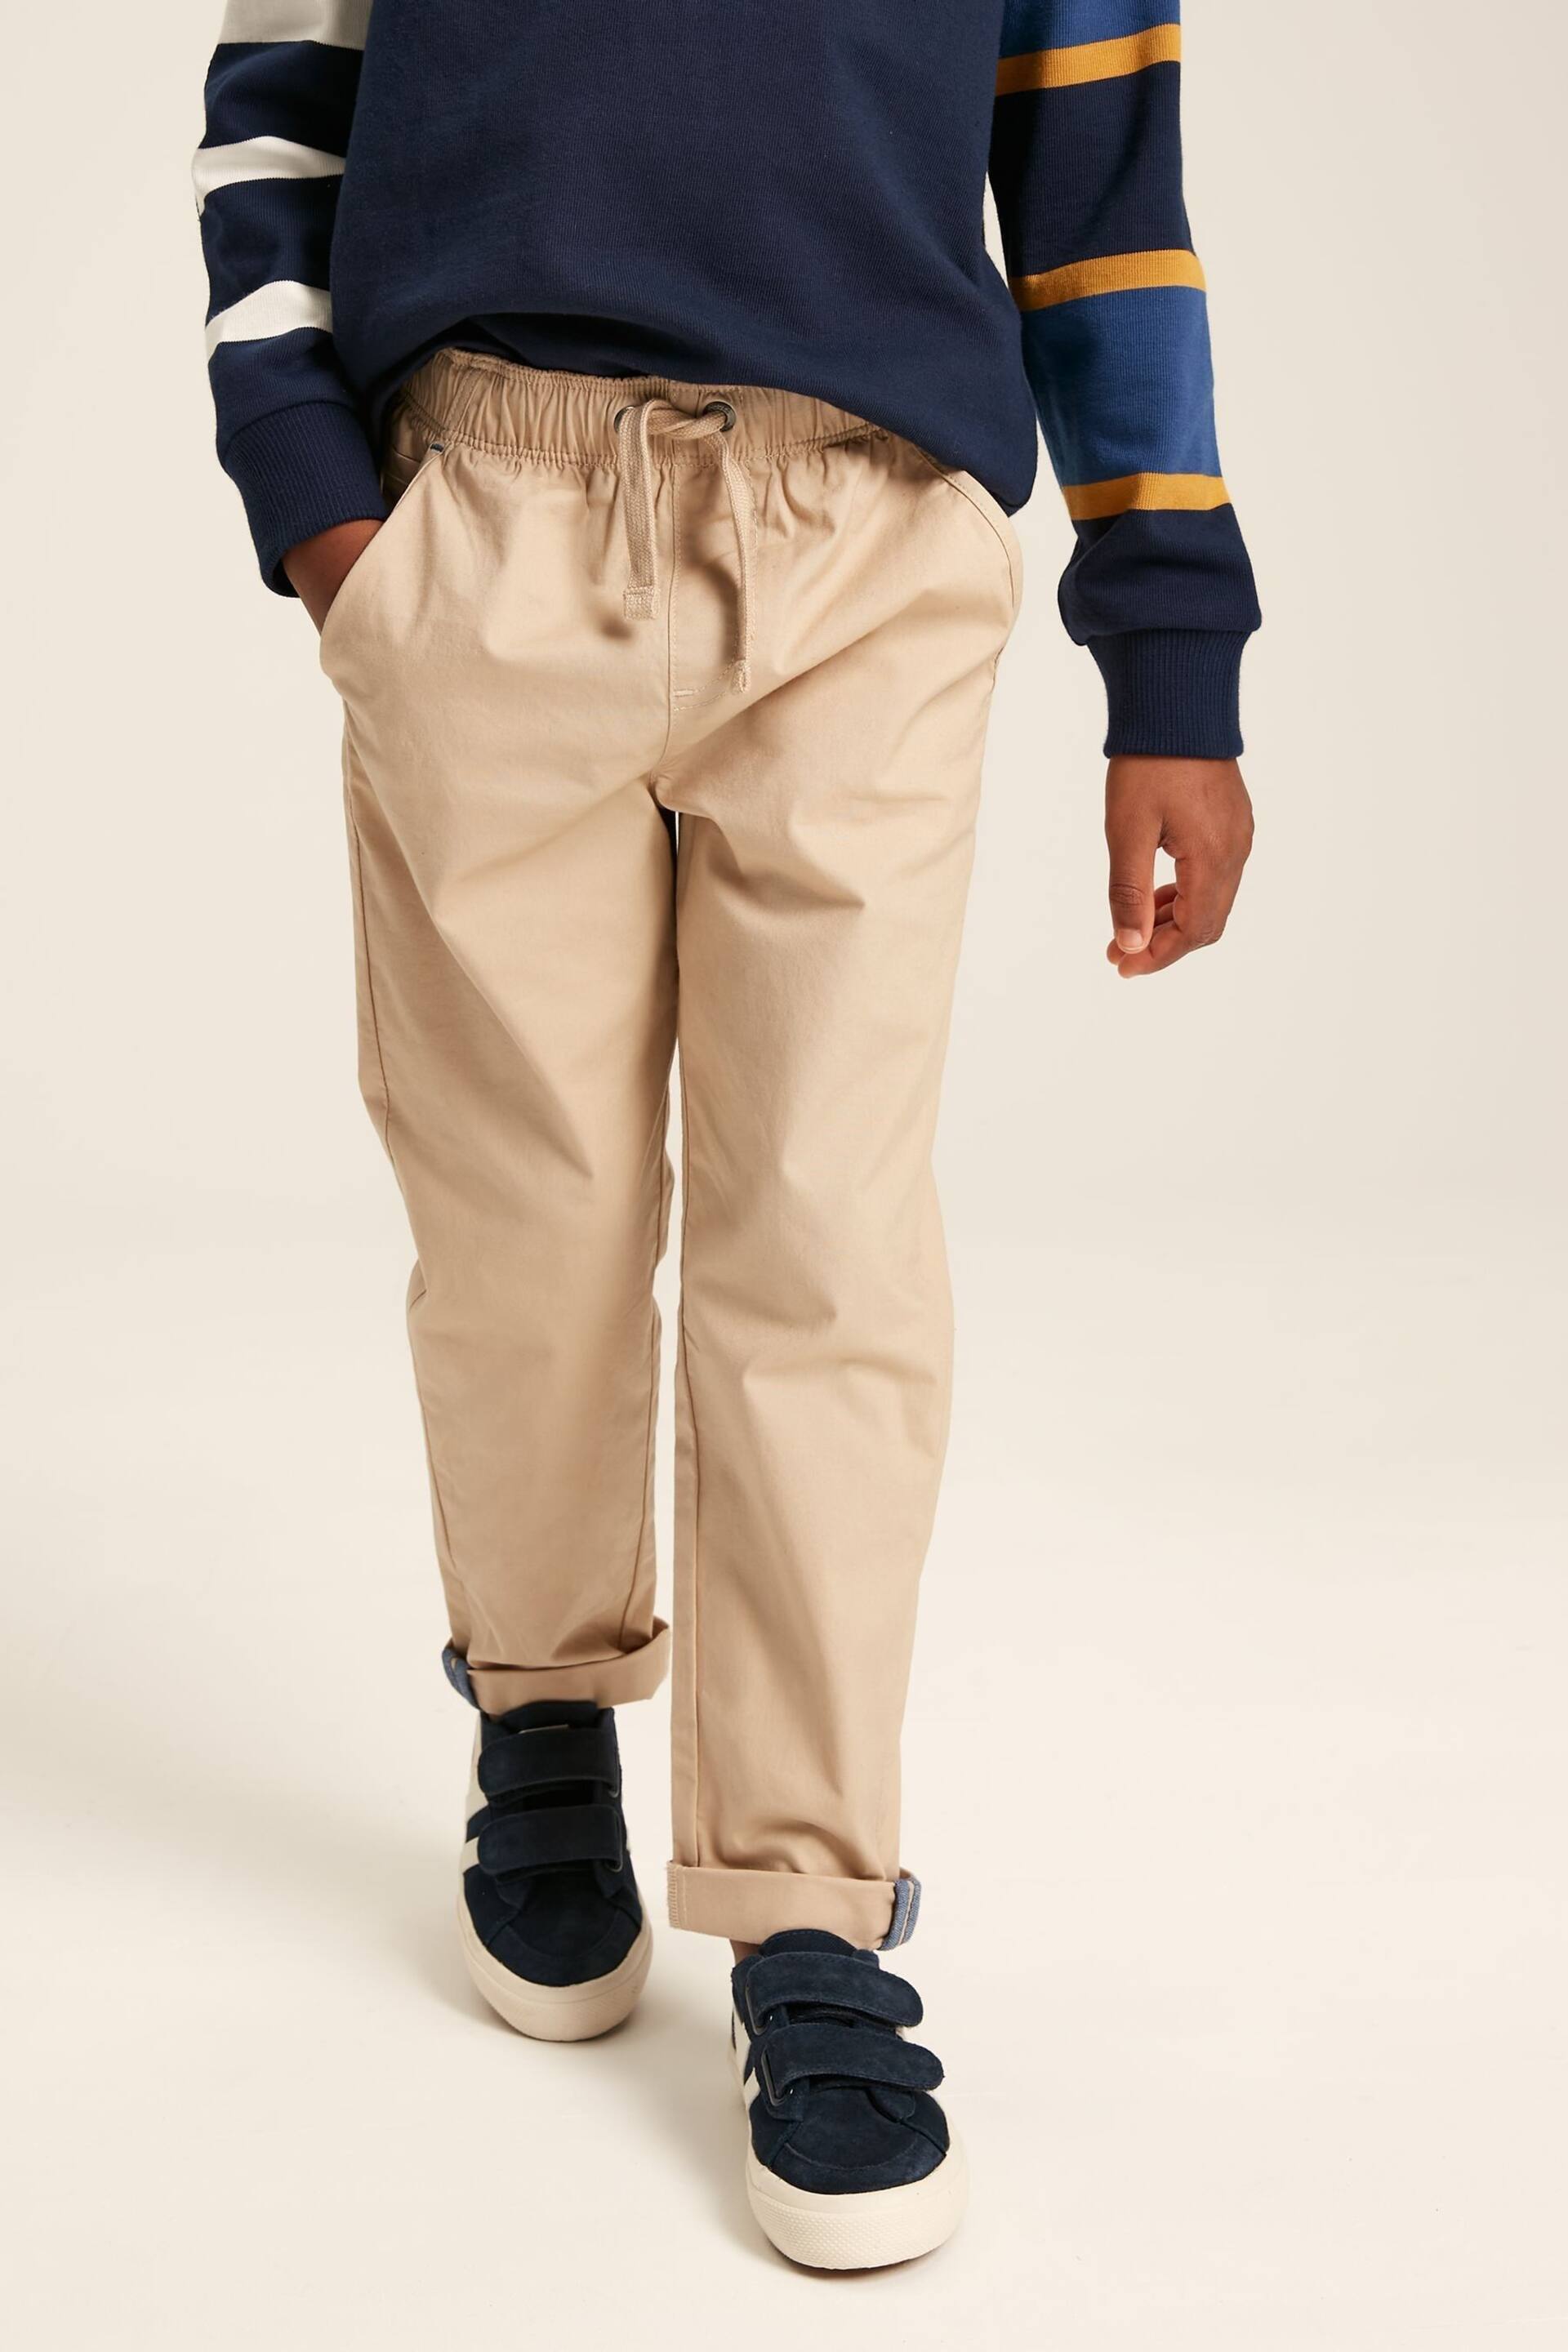 Joules Samson Stone Chino Trousers - Image 1 of 10